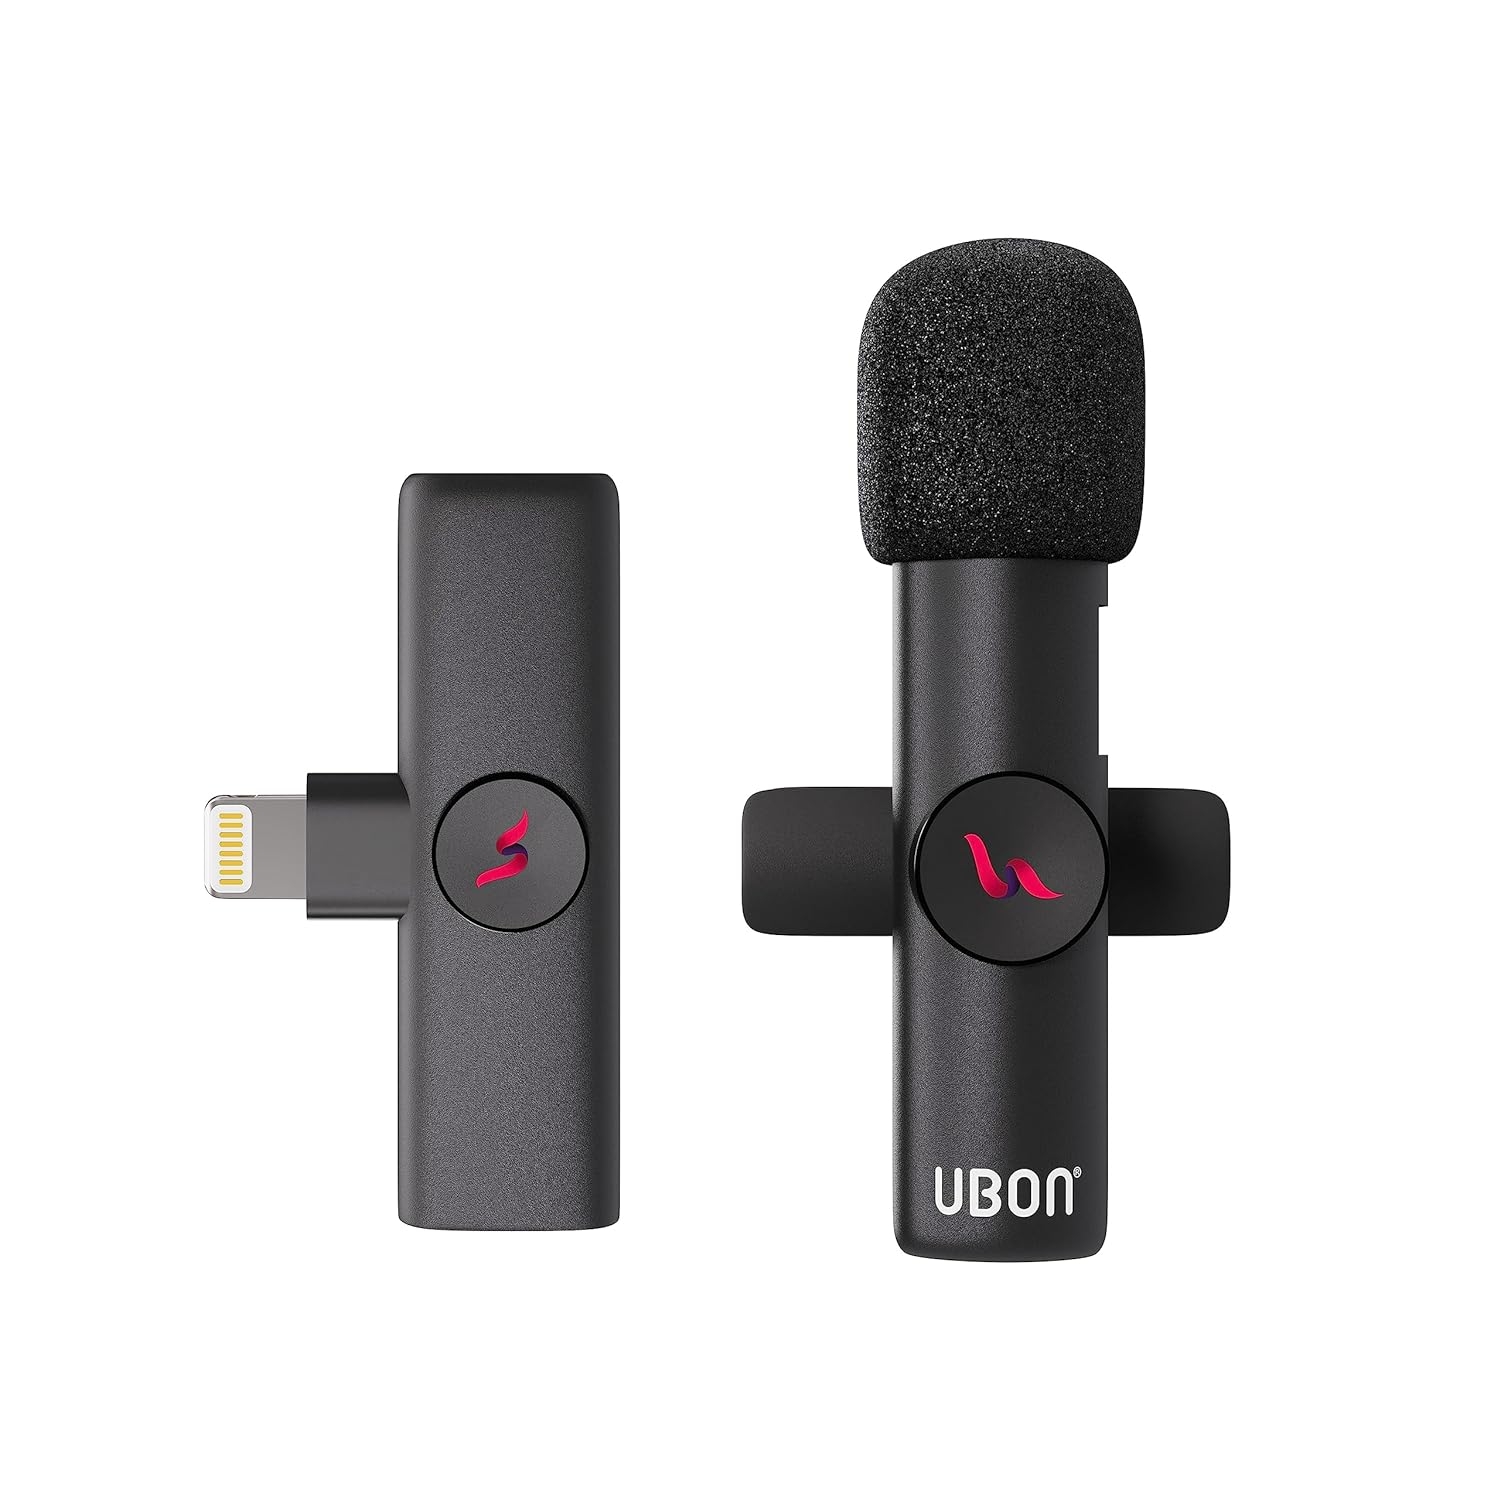 UBON CM-601 Wireless Collar Microphone for iPhone | 20m Connectivity Range | Vlogging Mic | Simple Plug & Record | Clear Timbre, Noise Cancellation | Type-C & iOS Charging Port | Bluetooth v5.0